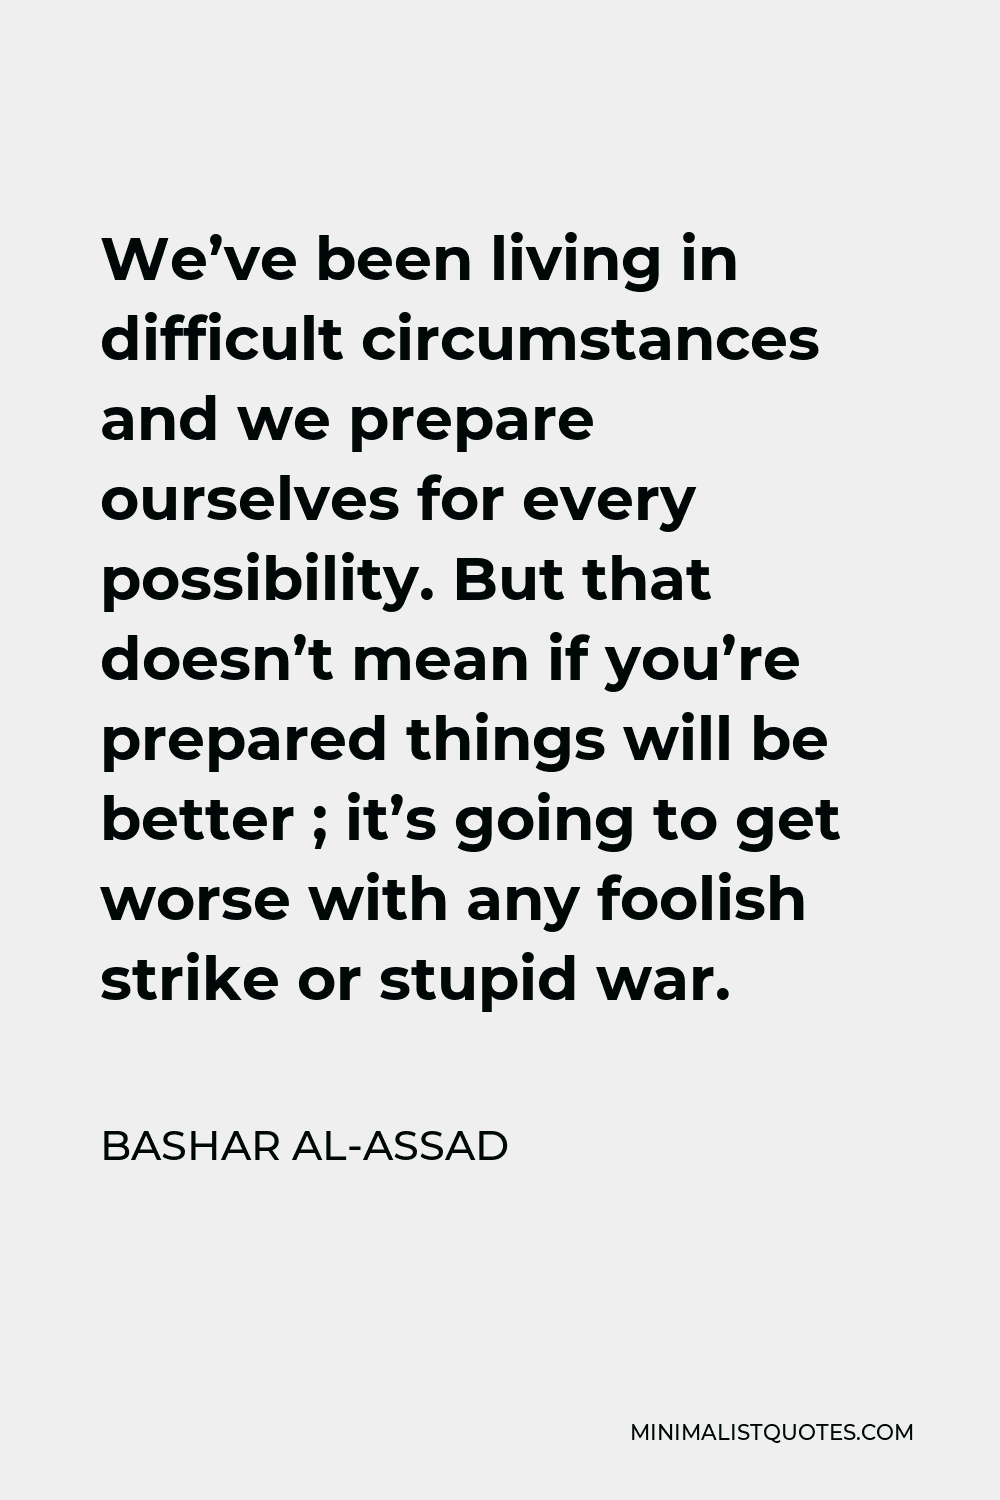 Bashar al-Assad Quote - We’ve been living in difficult circumstances and we prepare ourselves for every possibility. But that doesn’t mean if you’re prepared things will be better ; it’s going to get worse with any foolish strike or stupid war.